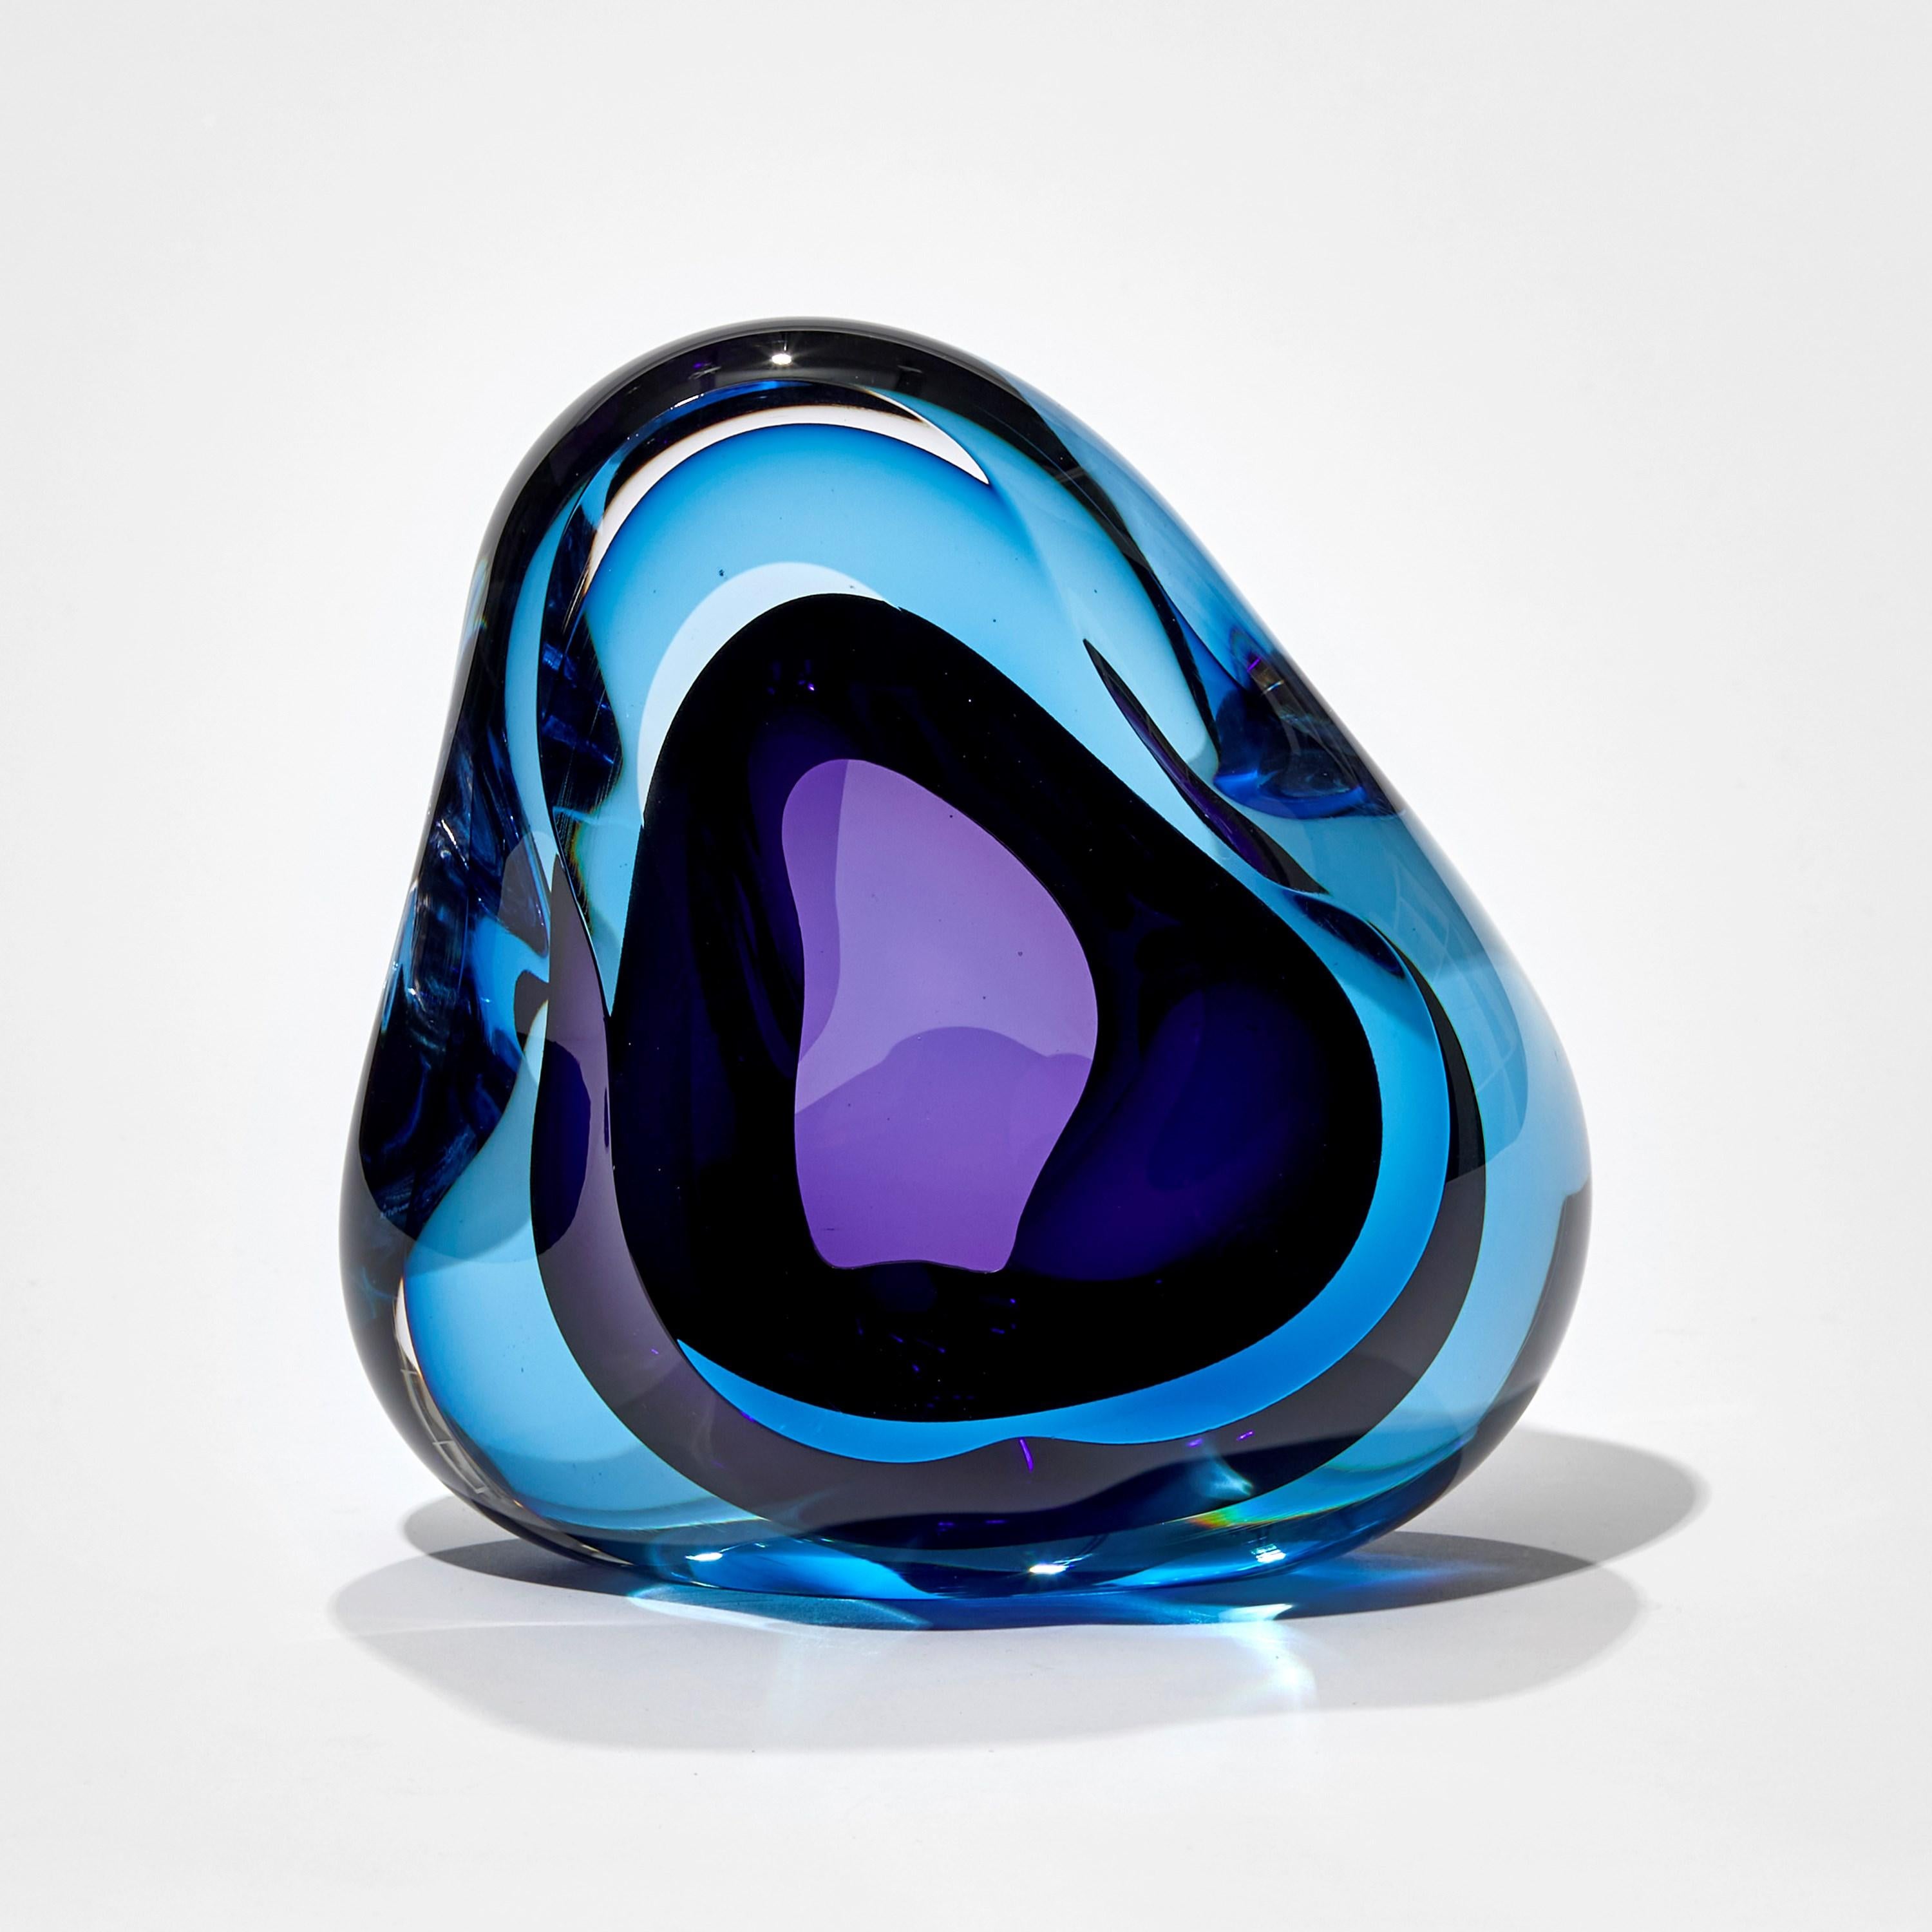 Vug in Turquoise and Purple is a unique hand-blown sculpture by the British artist Samantha Donaldson. Created by layers of colored glass in deep blue and rich purple, the transparent colors merge and create further hues throughout the piece. An